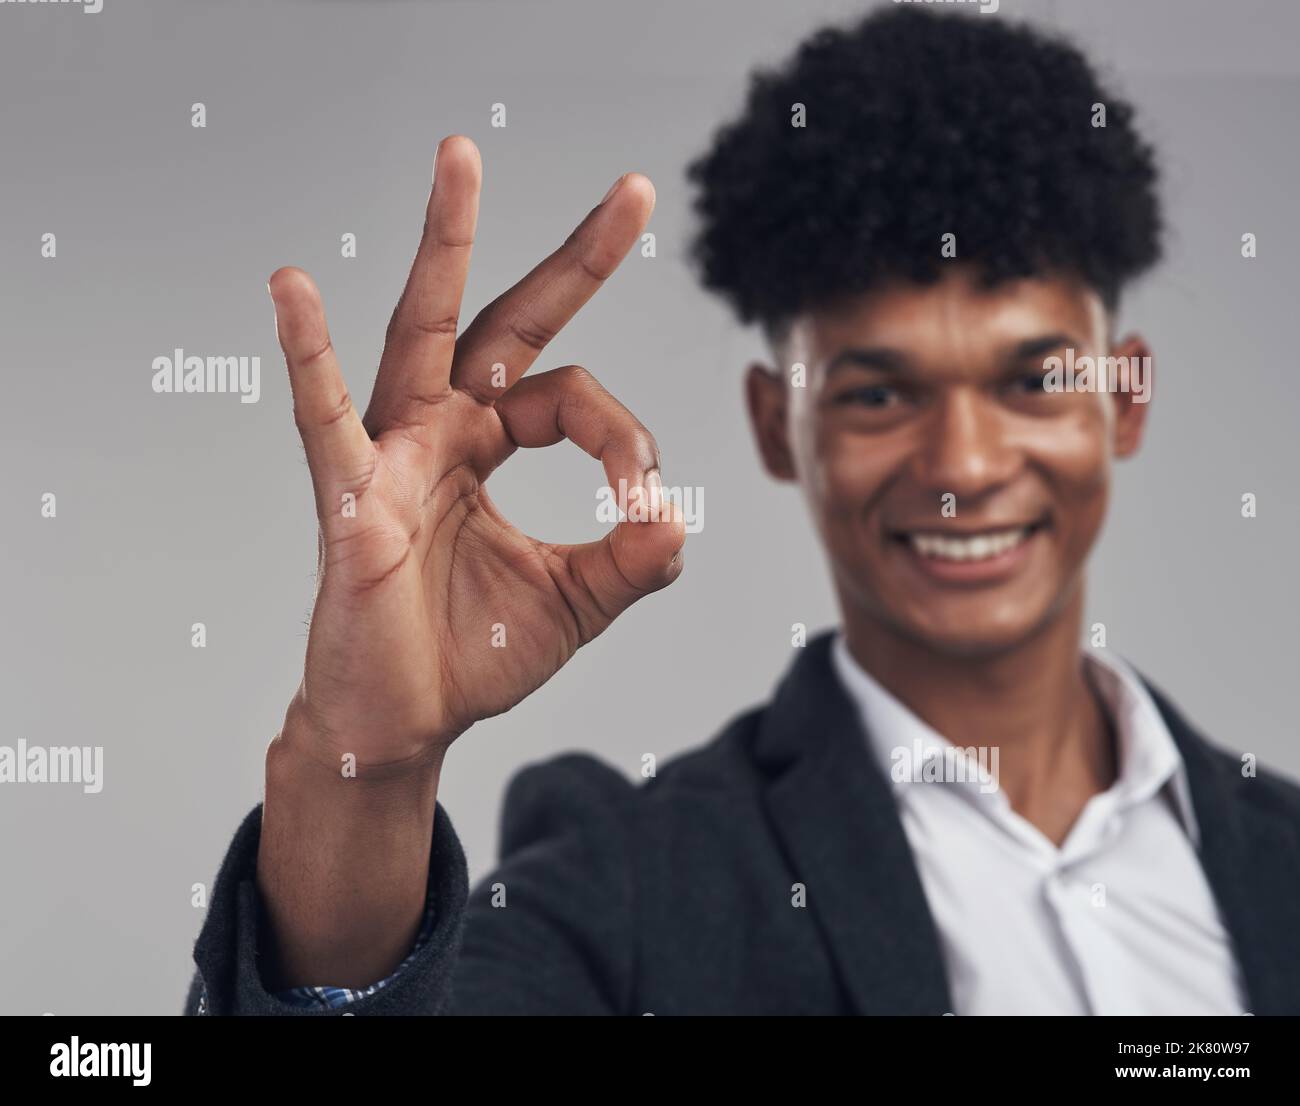 I dont double profit, I triple it. Studio shot of a young businessman showing an okay hand gesture against a grey background. Stock Photo